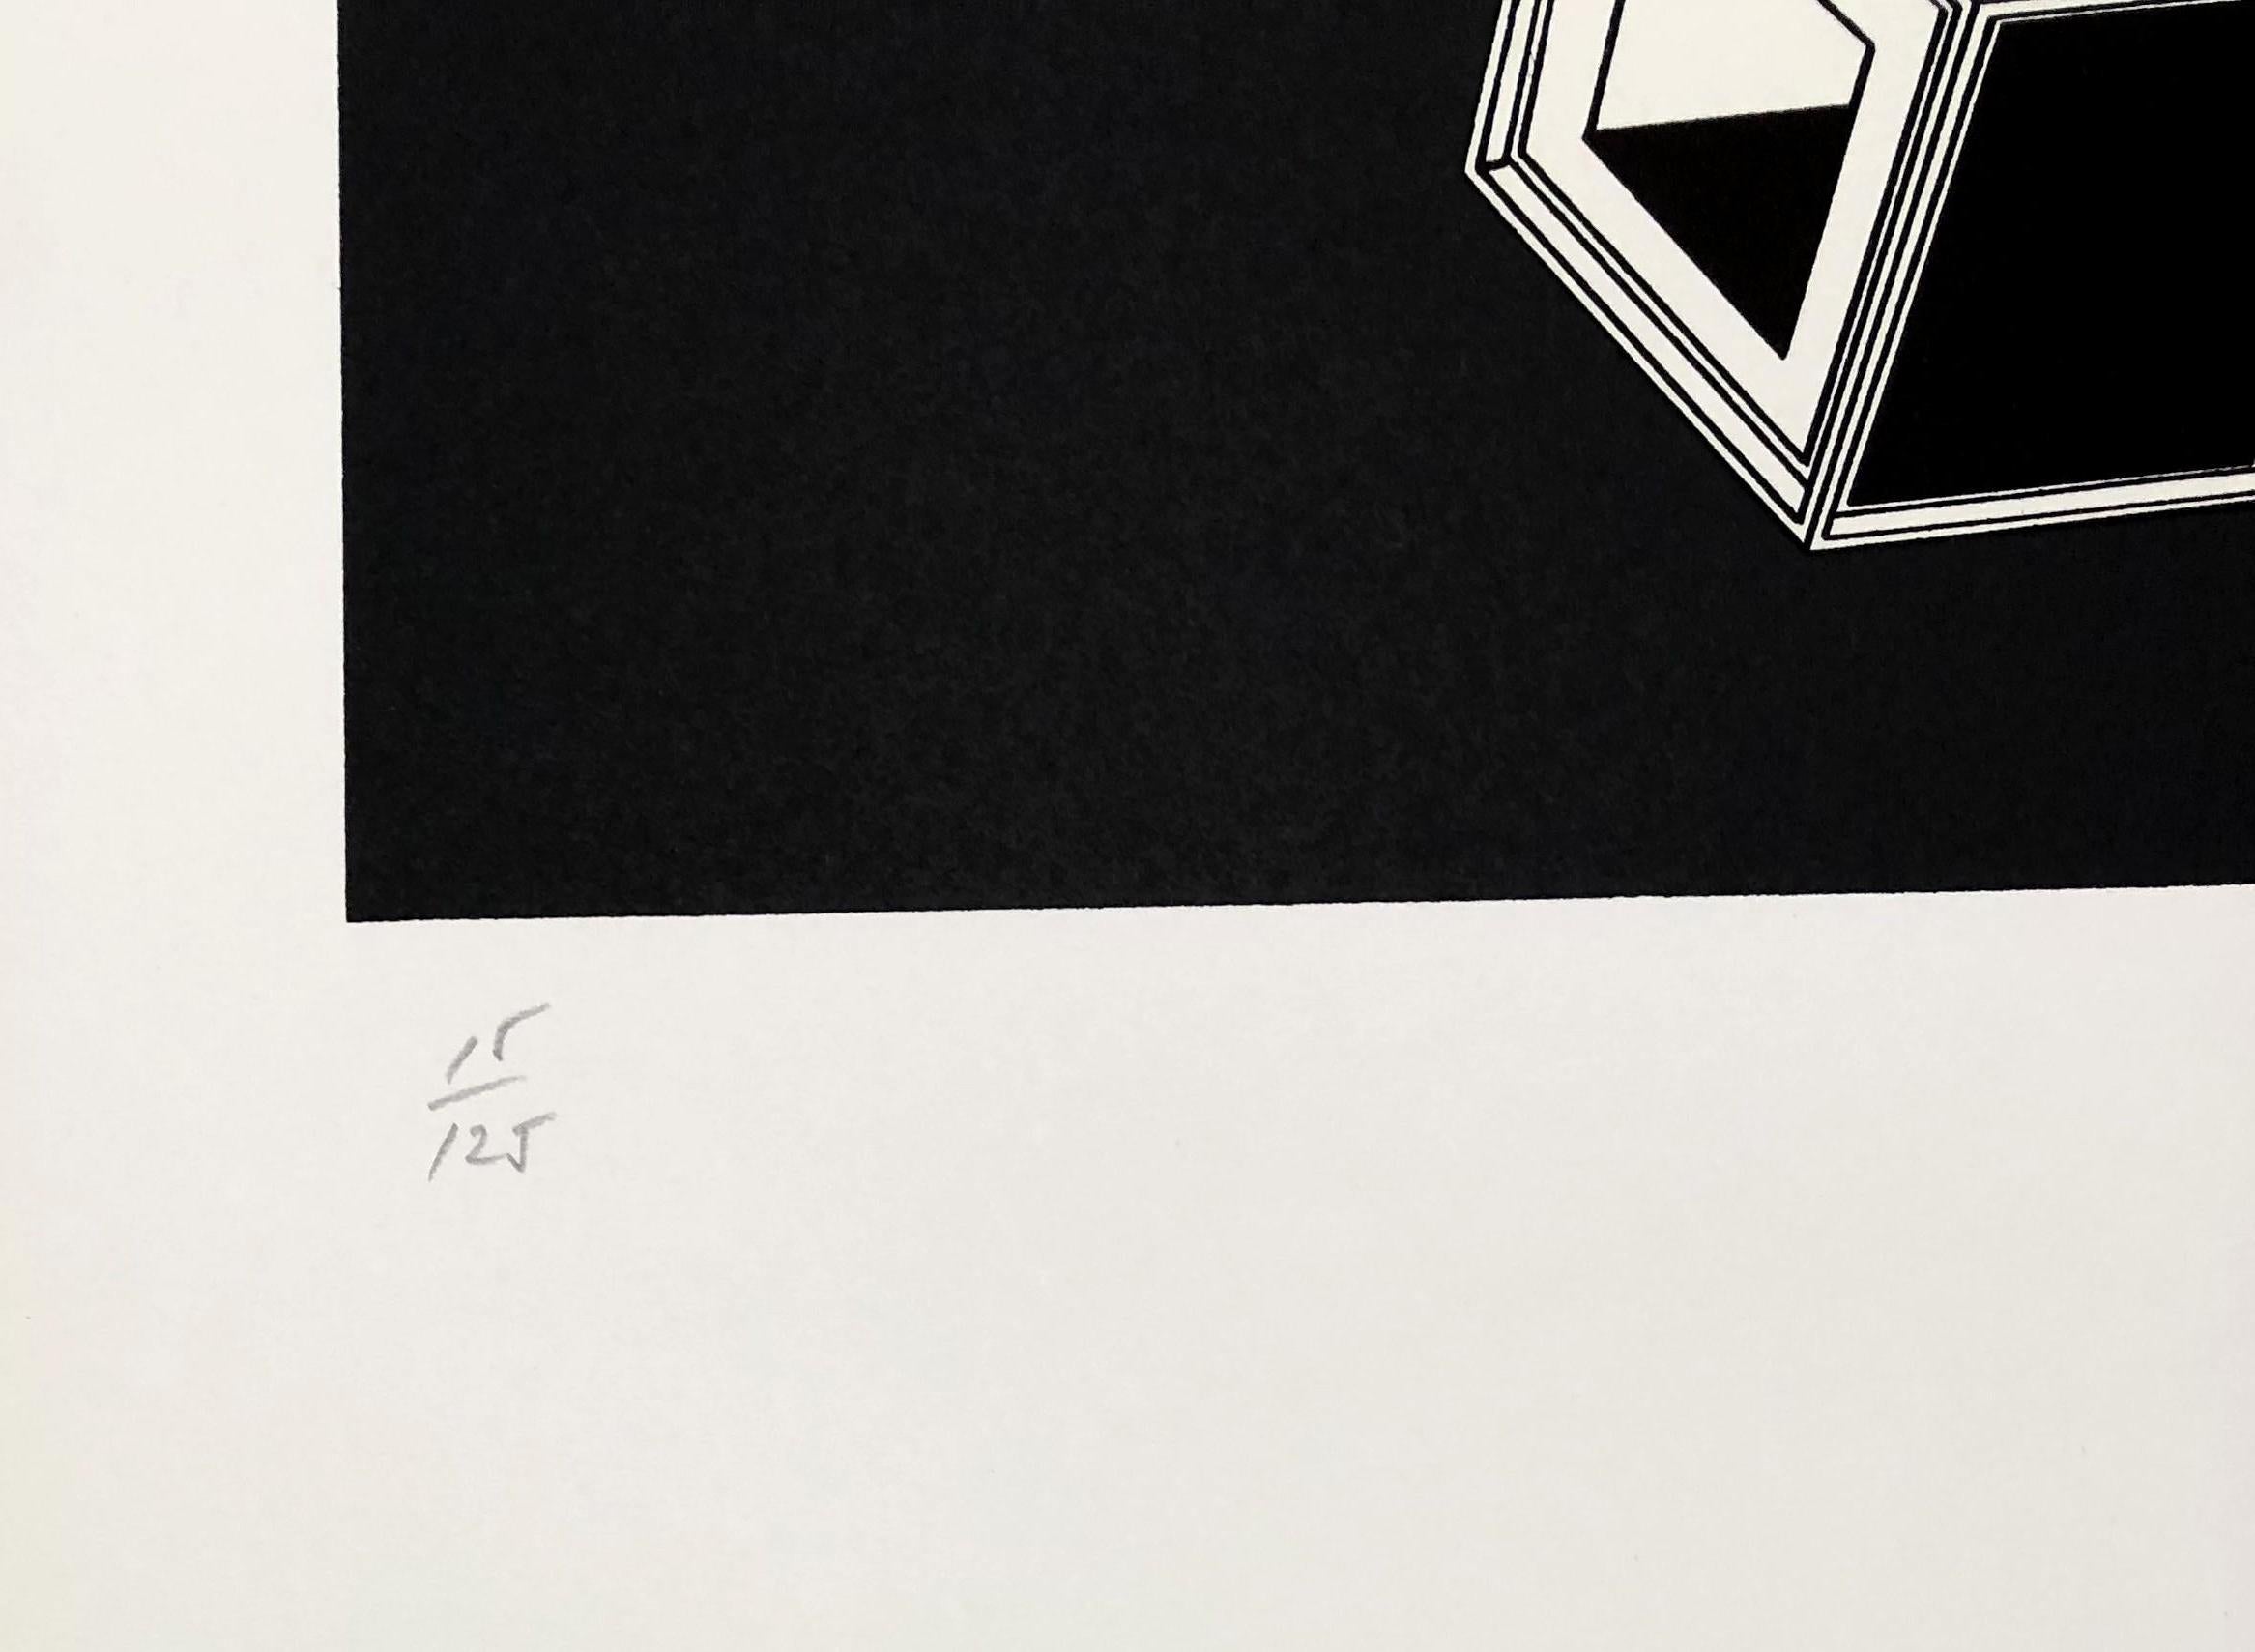 Geometric Composition VI - Original Lithograph Handsigned - 125 copies - Black Abstract Print by Alain Le Yaouanc